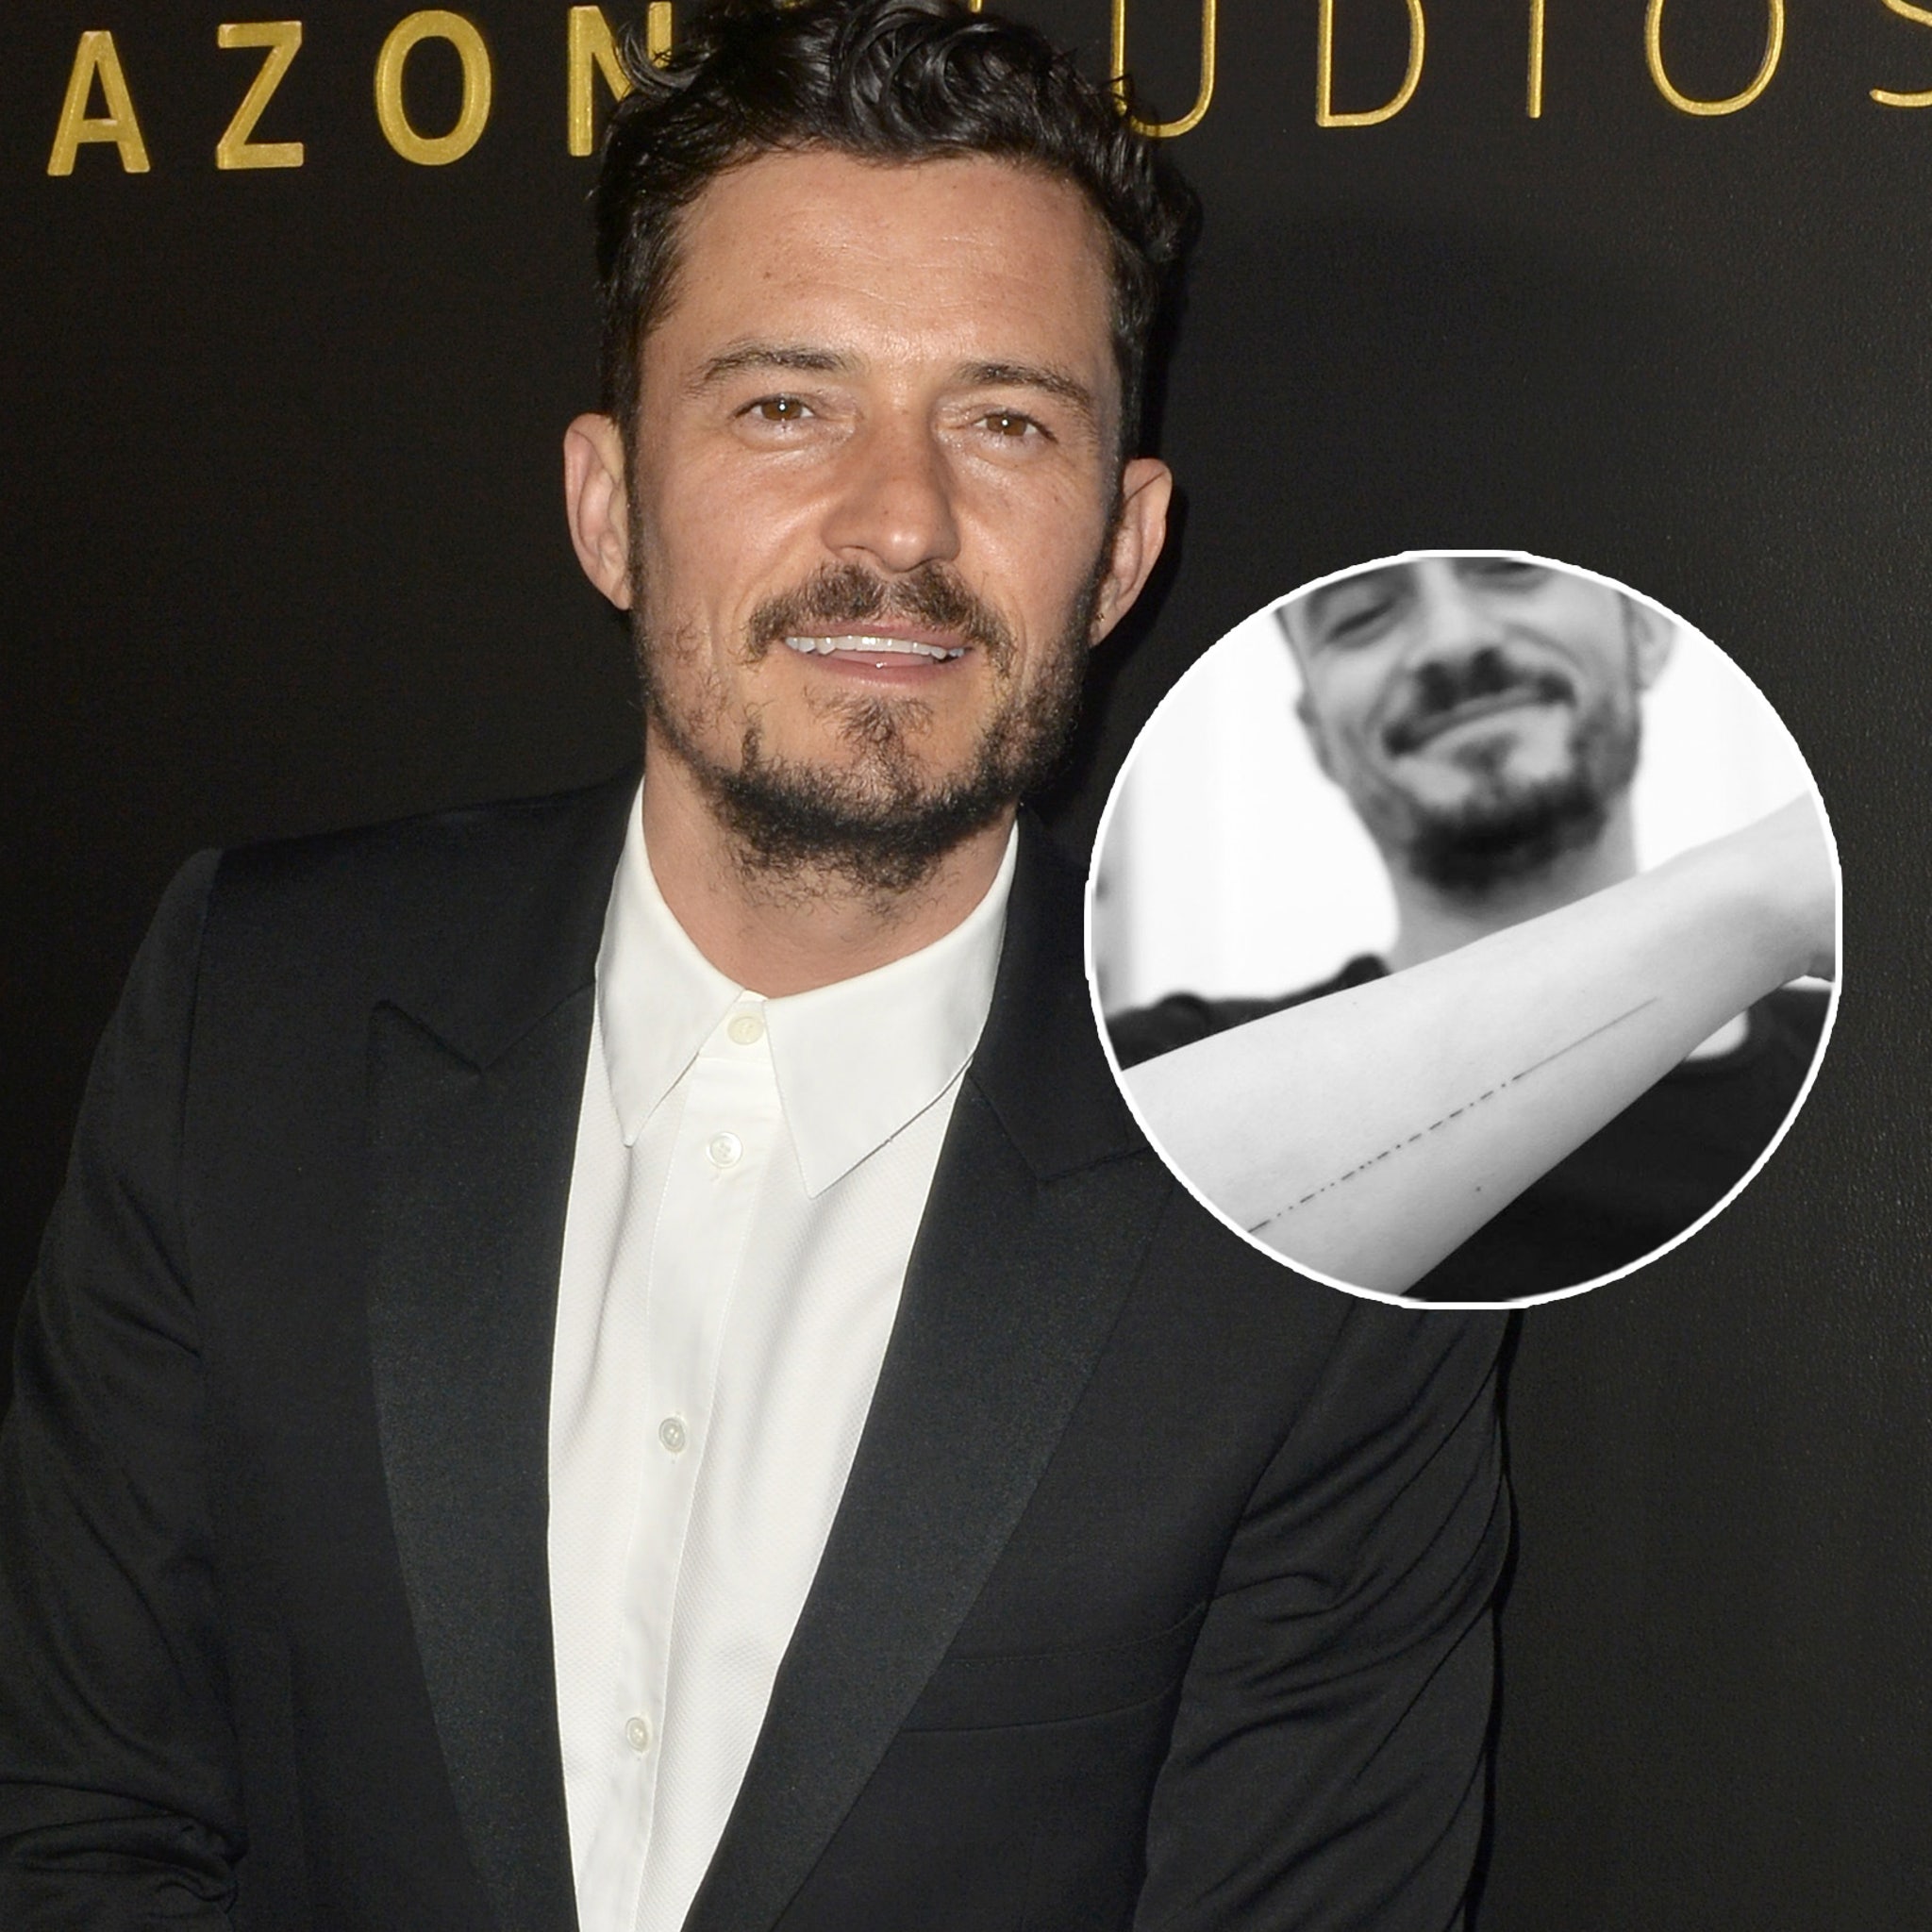 Orlando Bloom Fixes Misspelled Morse Code Tattoo of Son's Name